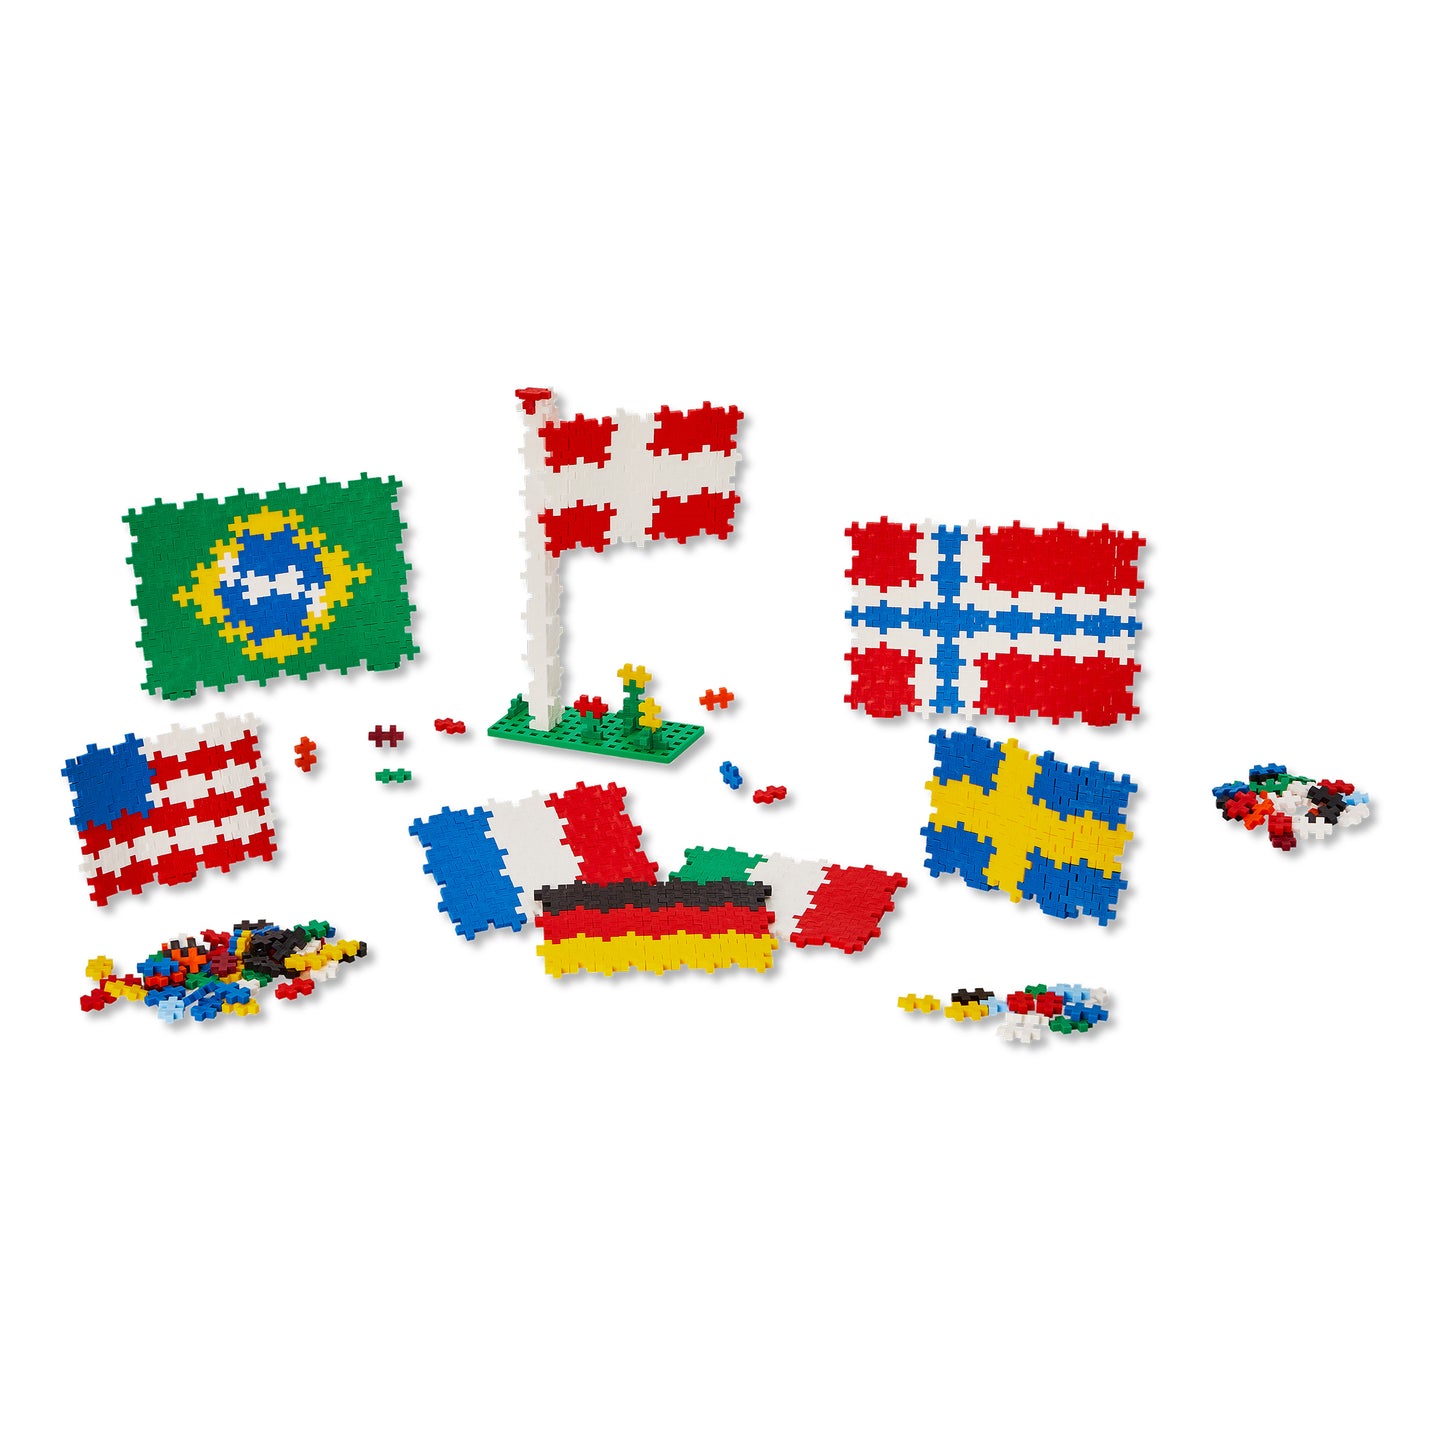 PLUS-PLUS - LEARN TO BUILD - FLAGS OF THE WORLD 700PCS